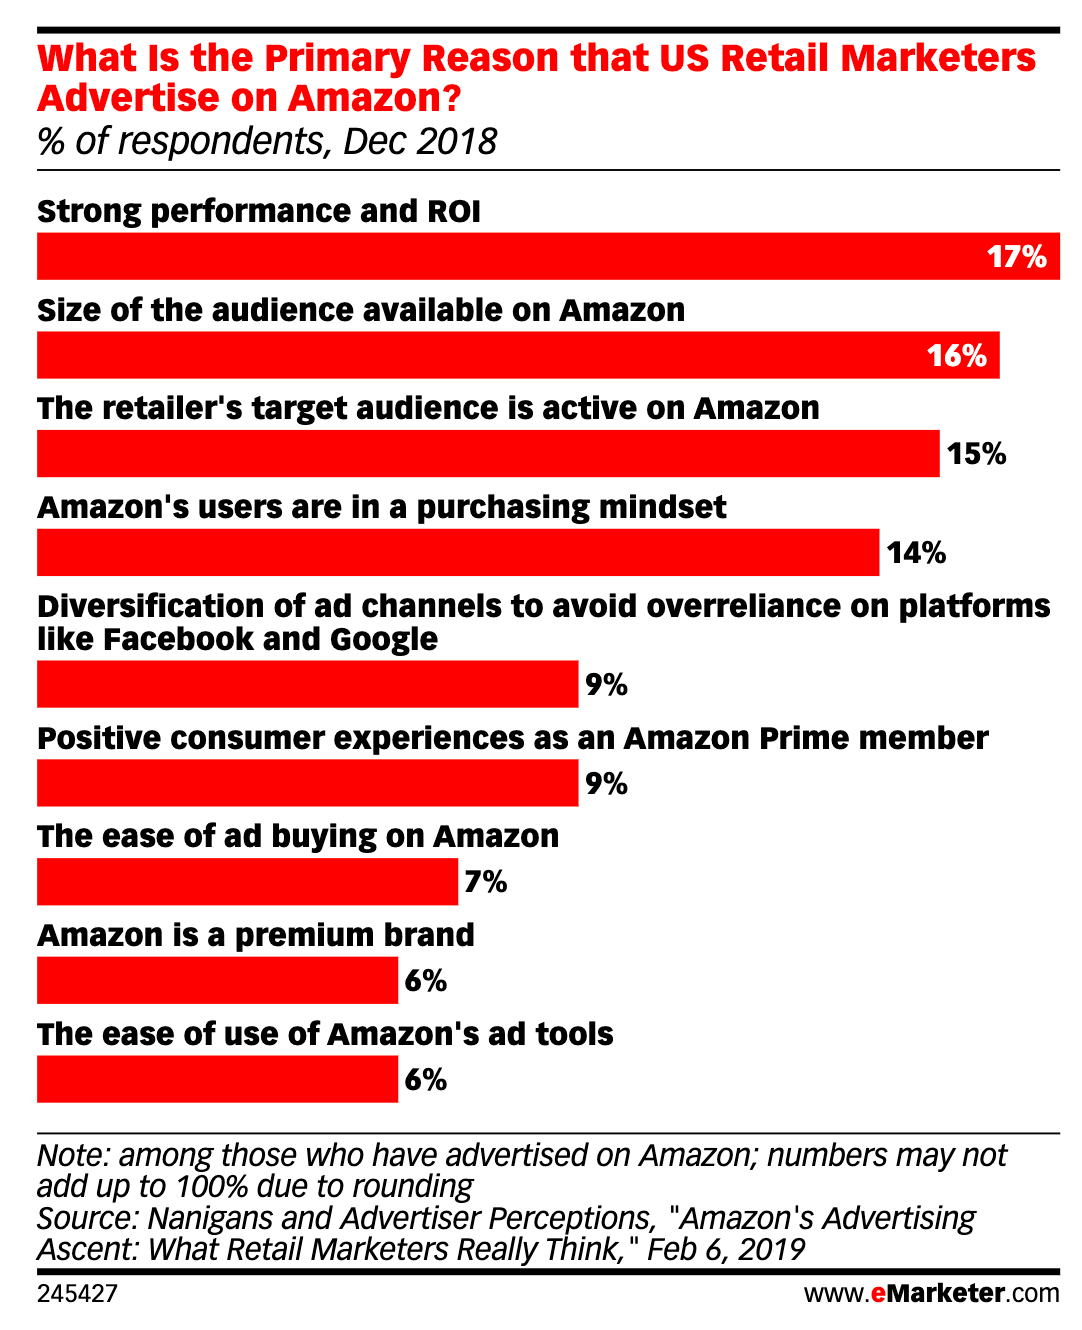 Figure 1: sub-principal reasons why US retail marketers advertise on Amazon, as compiled by eMarketer.